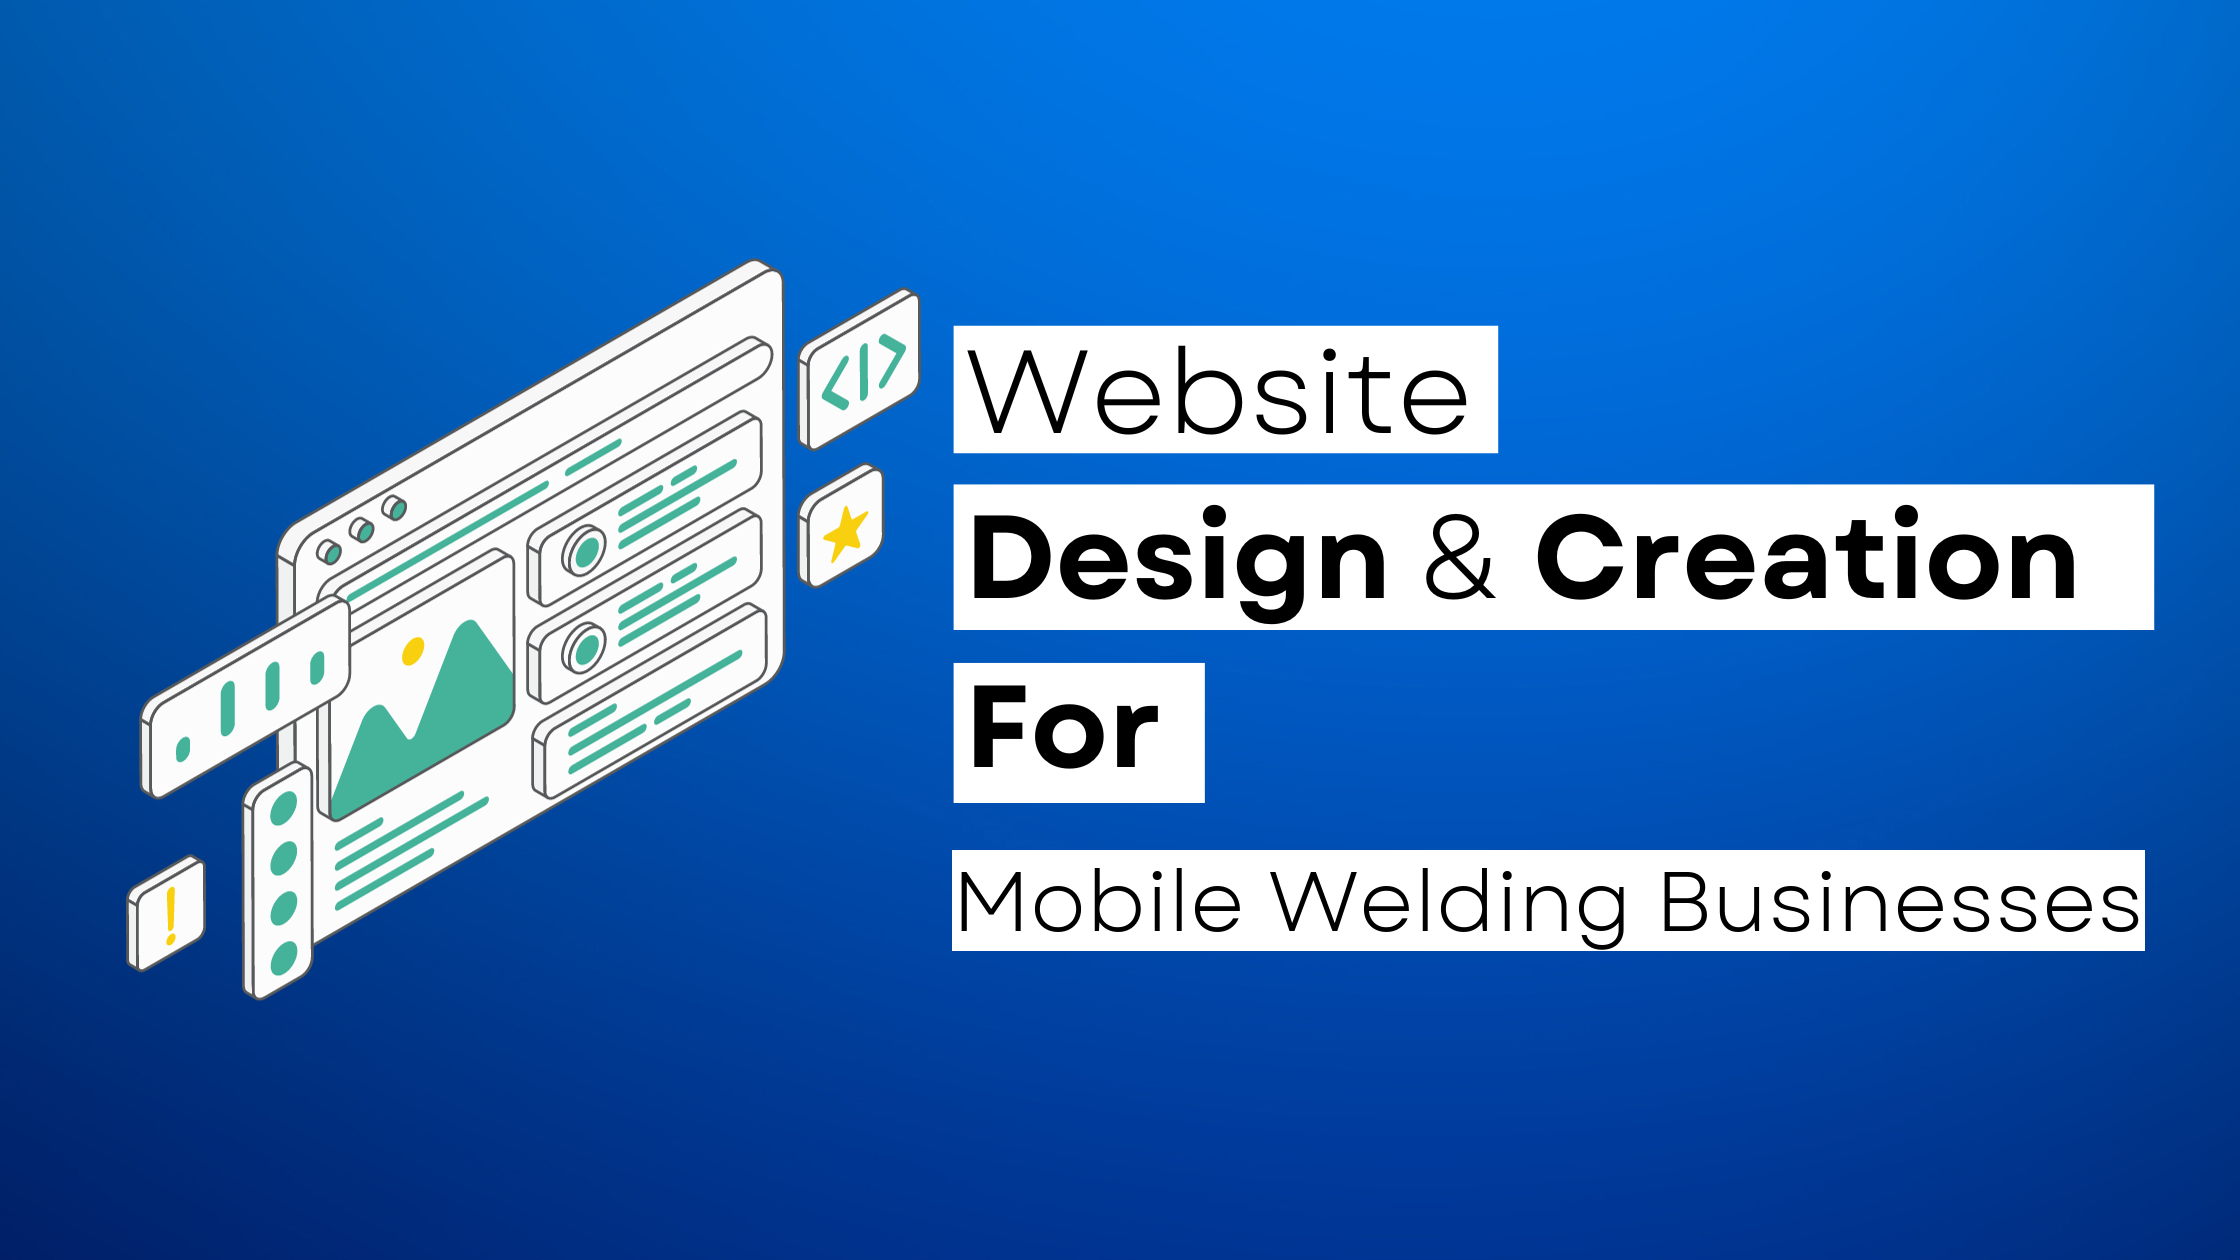 How to start a Mobile Welding website